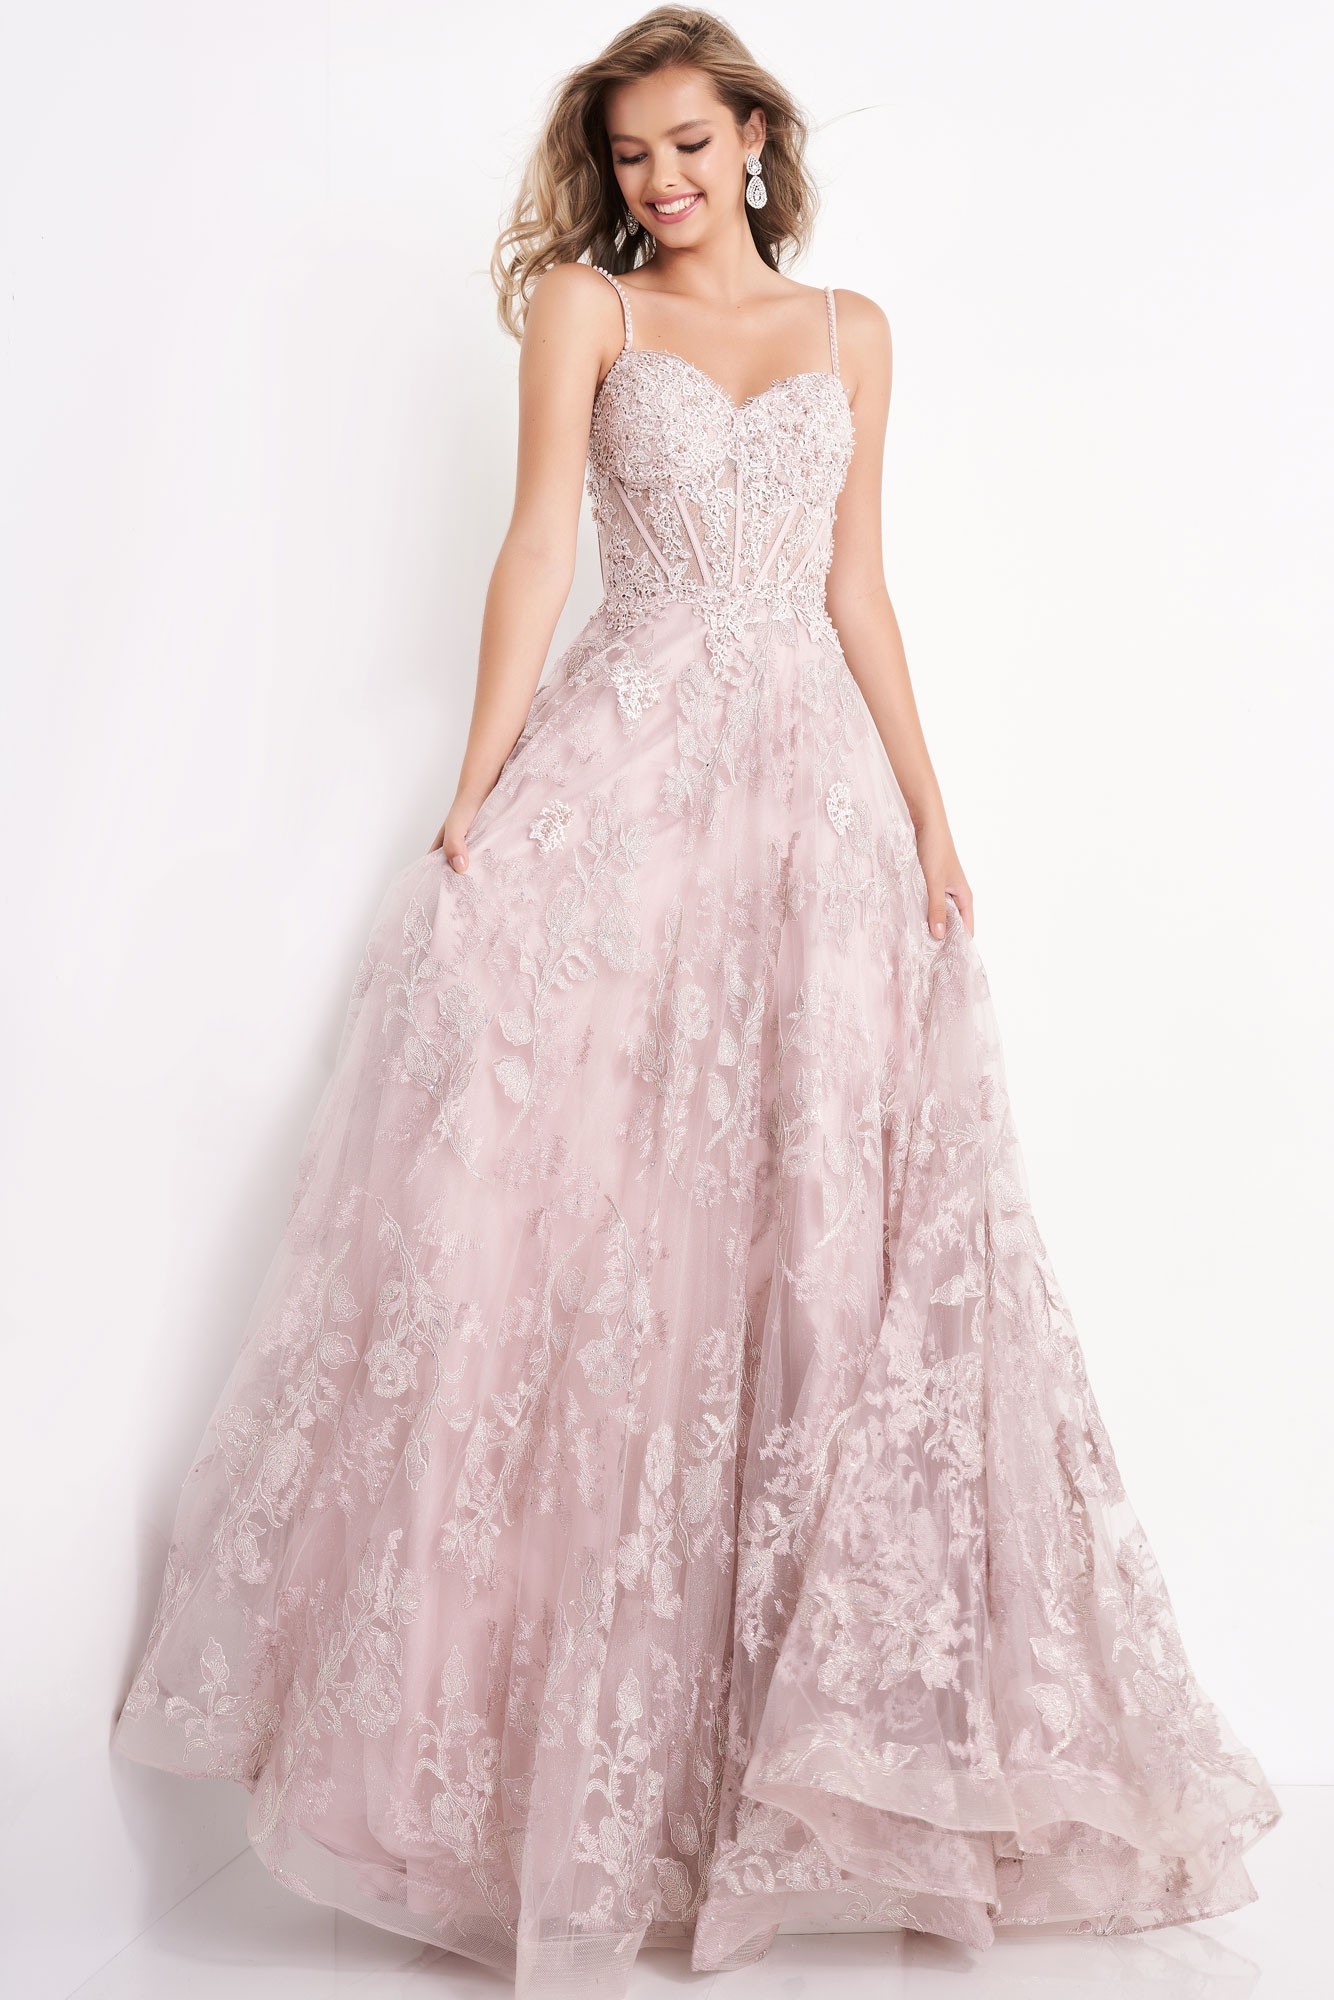 JVN by Jovani JVN06474 Lace Corset Bodice Ball Gown | RissyRoos.com